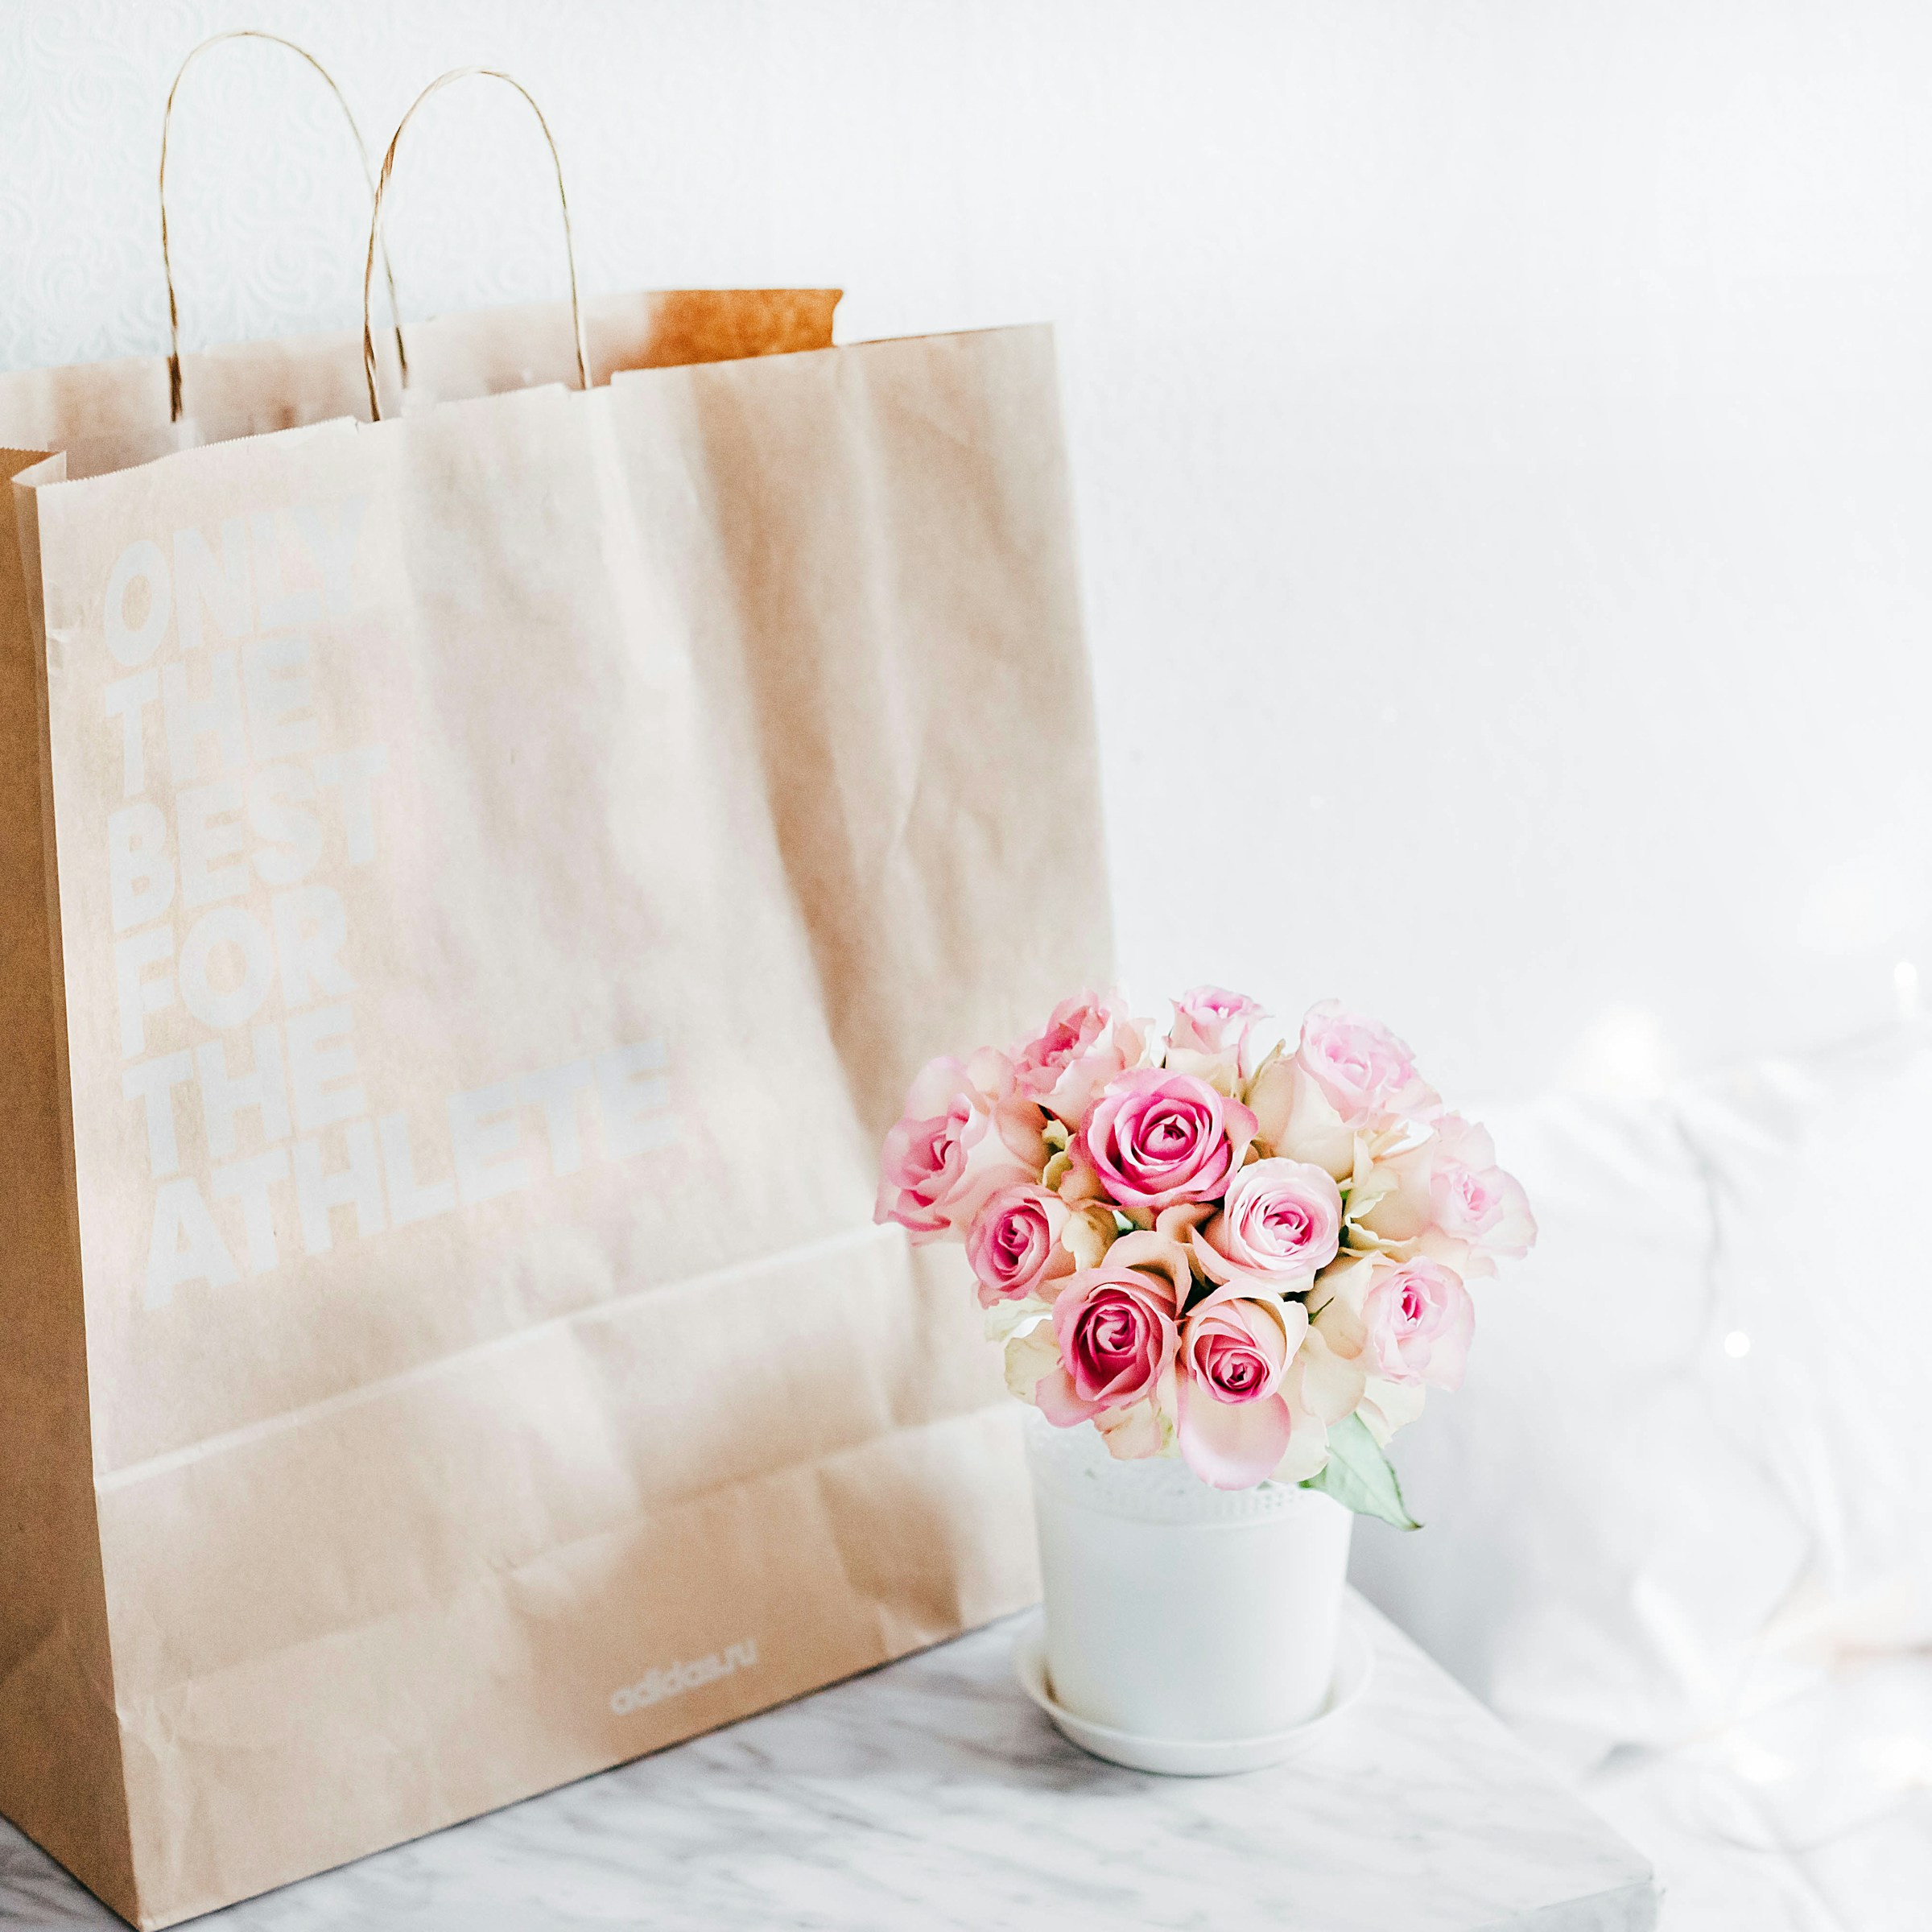 A bouquet of pink roses and a brown bag | Source: Unsplash